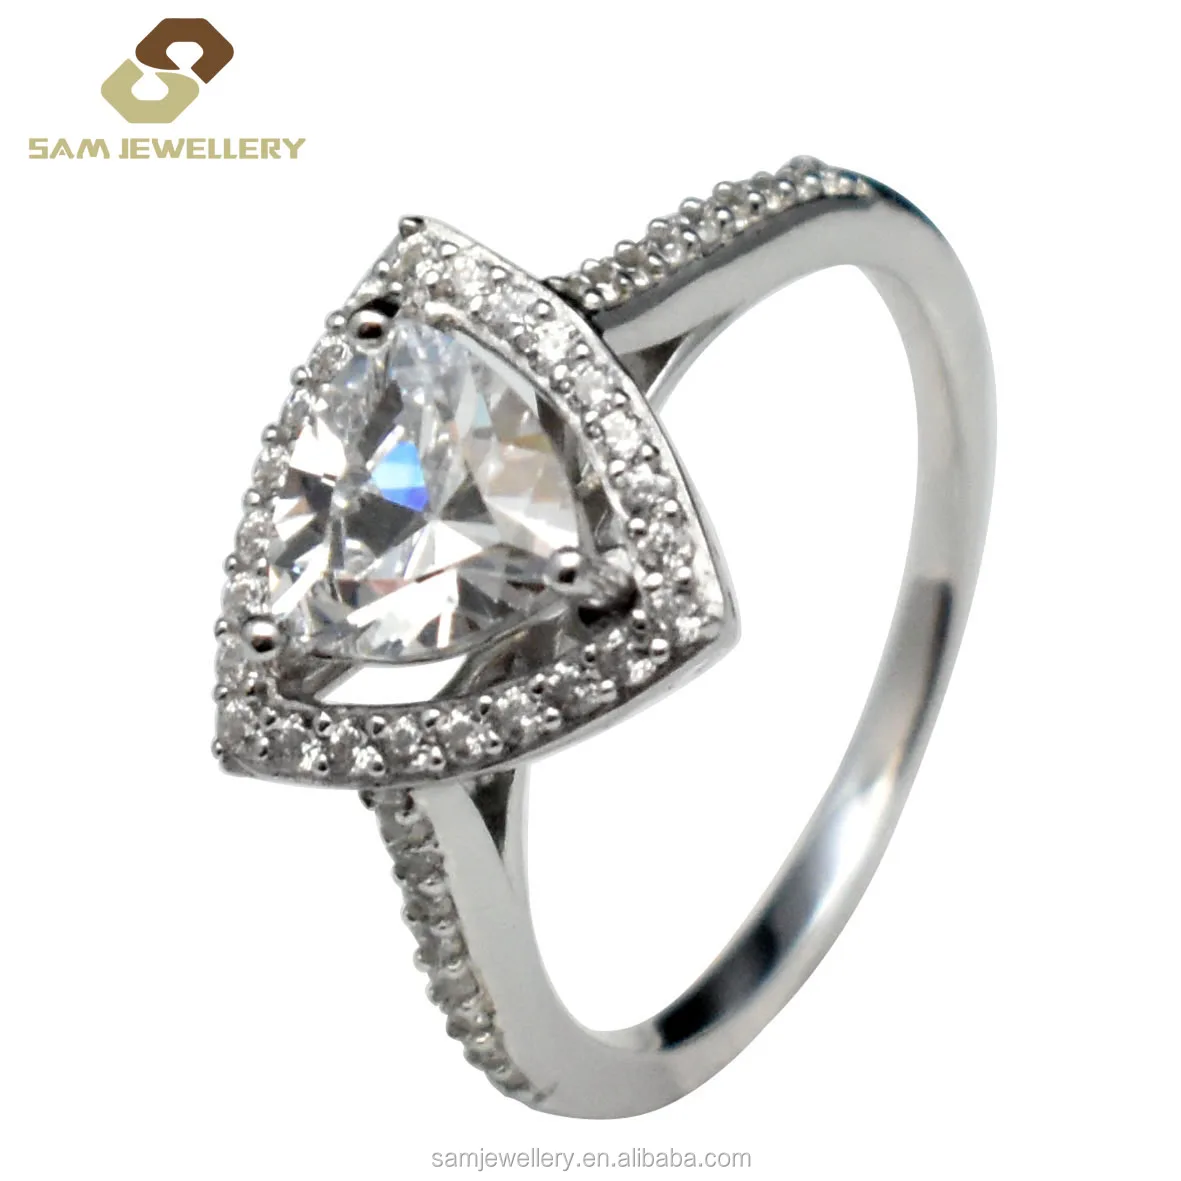 Wholesale European Fashion Sterling 925 Silver Halo Triangle Cubic Zirconia  Solitaire Wedding Ring Jewelry - Buy Rings Jewelry Women,925 Sterling  Silver Ring,925 China Diamond Rings Product on Alibaba.com